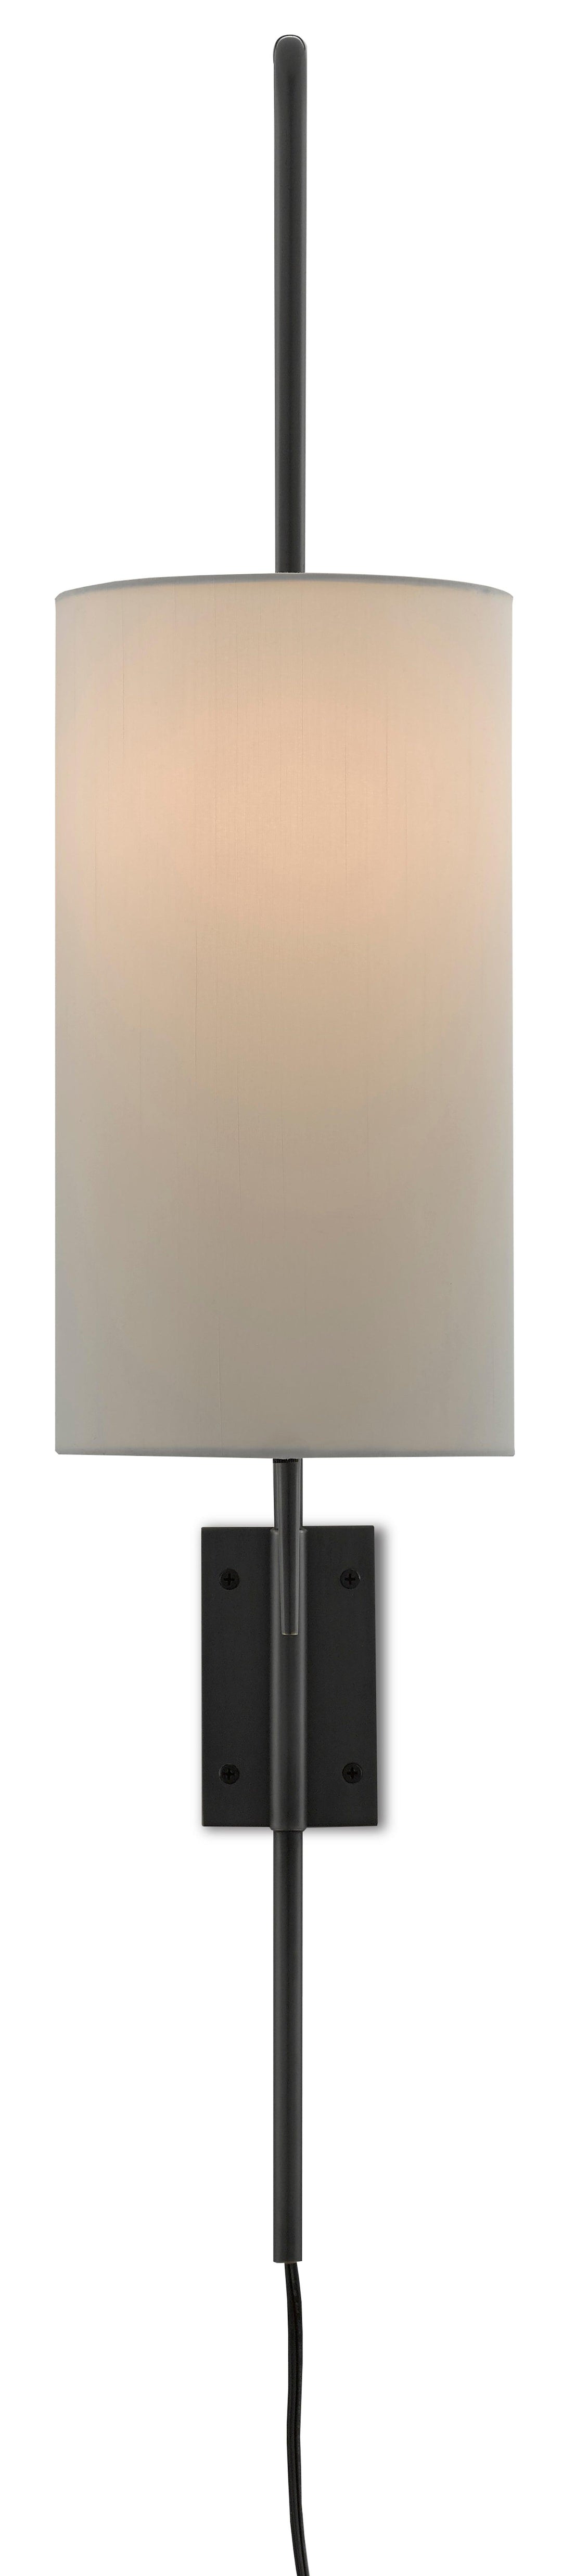 Tamsin Wall Sconce - Casey & Company